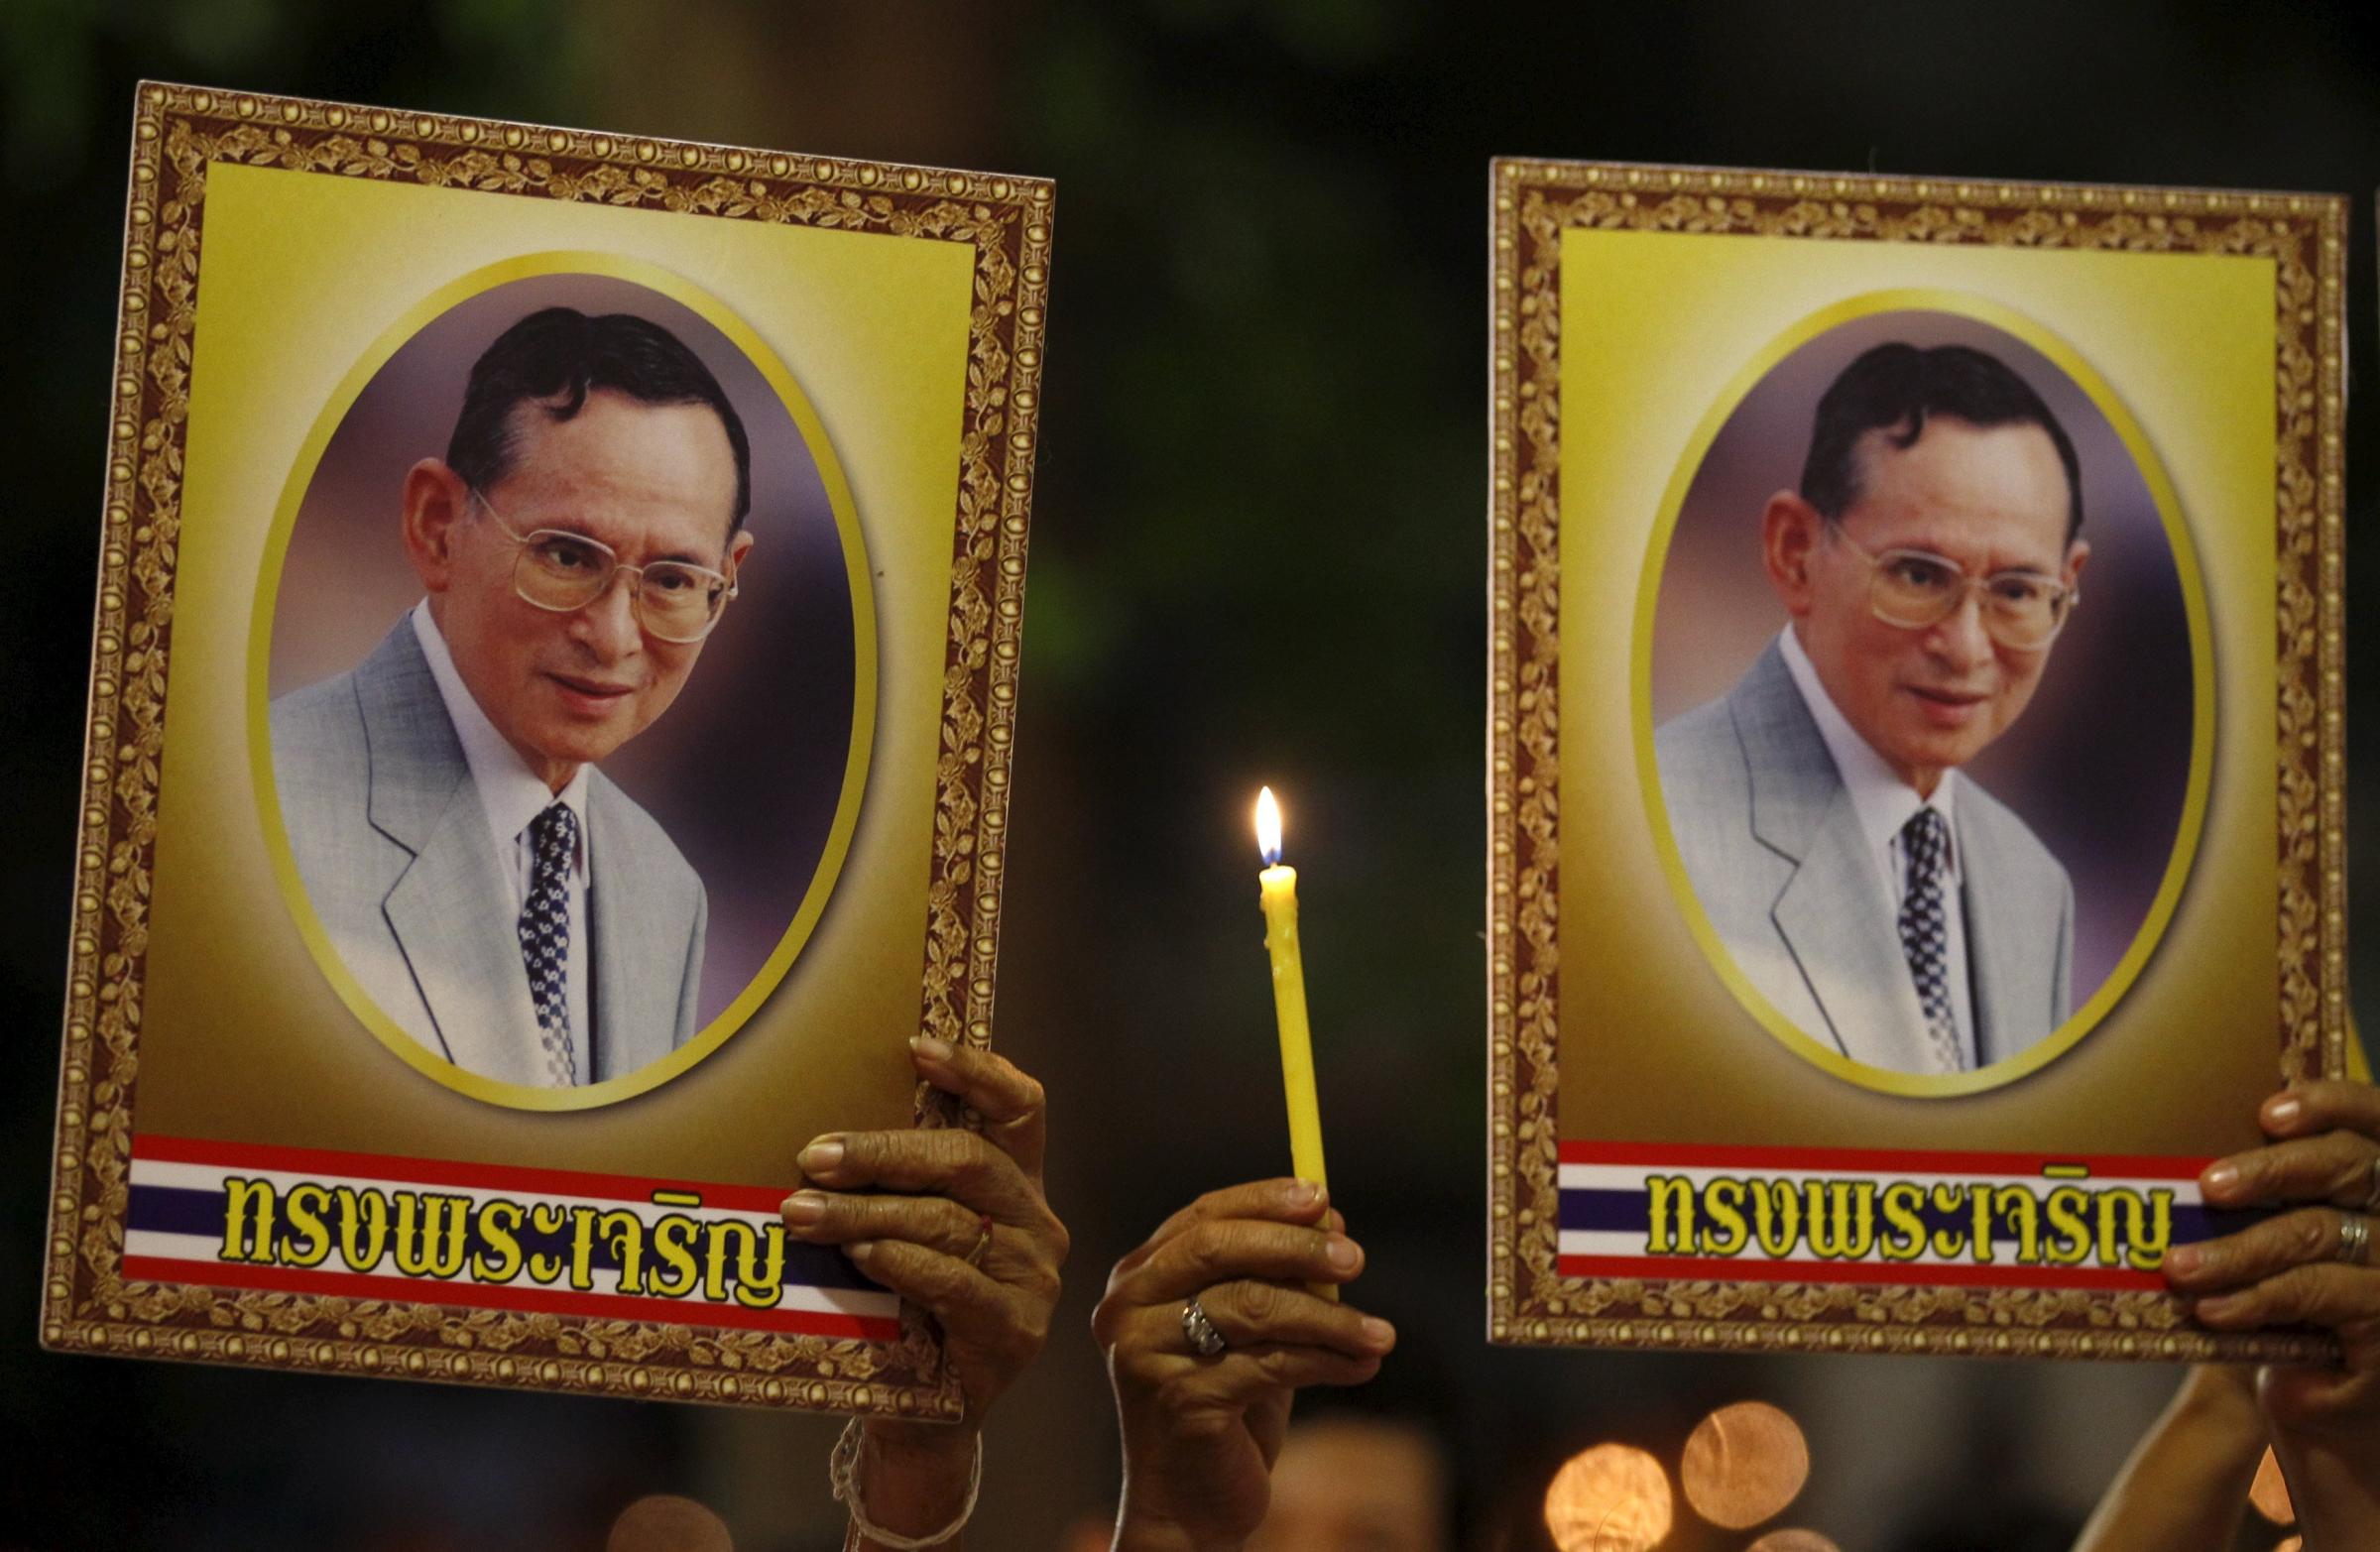 Well-wishers hold a lit candle and portraits of Thailand's King Bhumibol Adulyadej at Siriraj hospital, where a group has gathered to mark his 88th birthday, in Bangkok